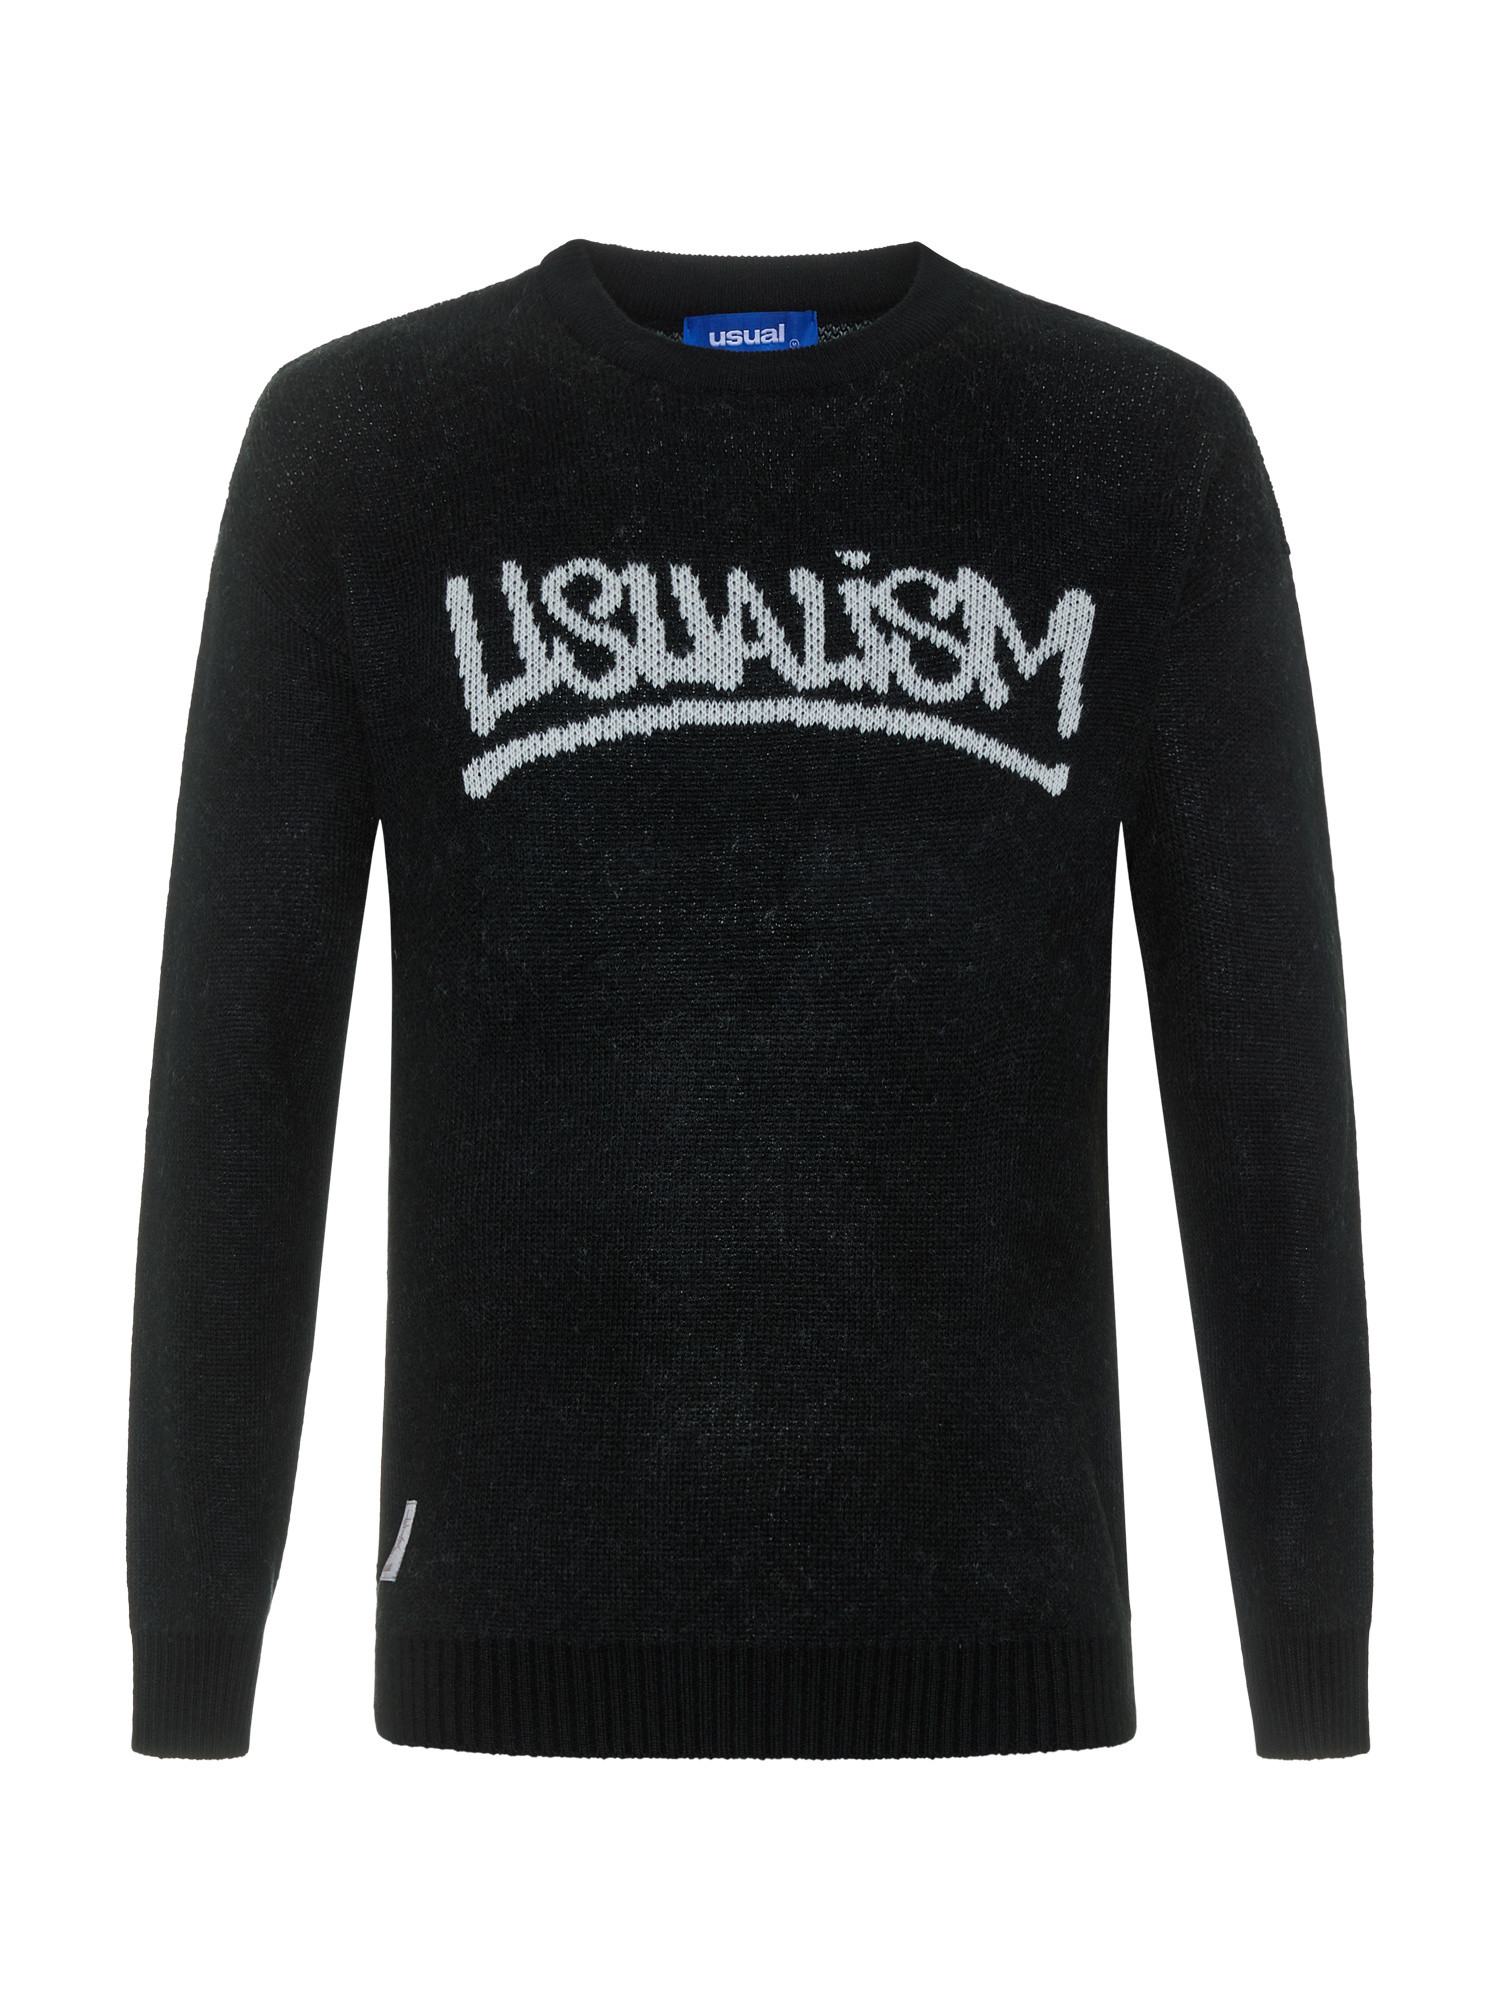 Usual - Usualism Sweater, Black, large image number 0